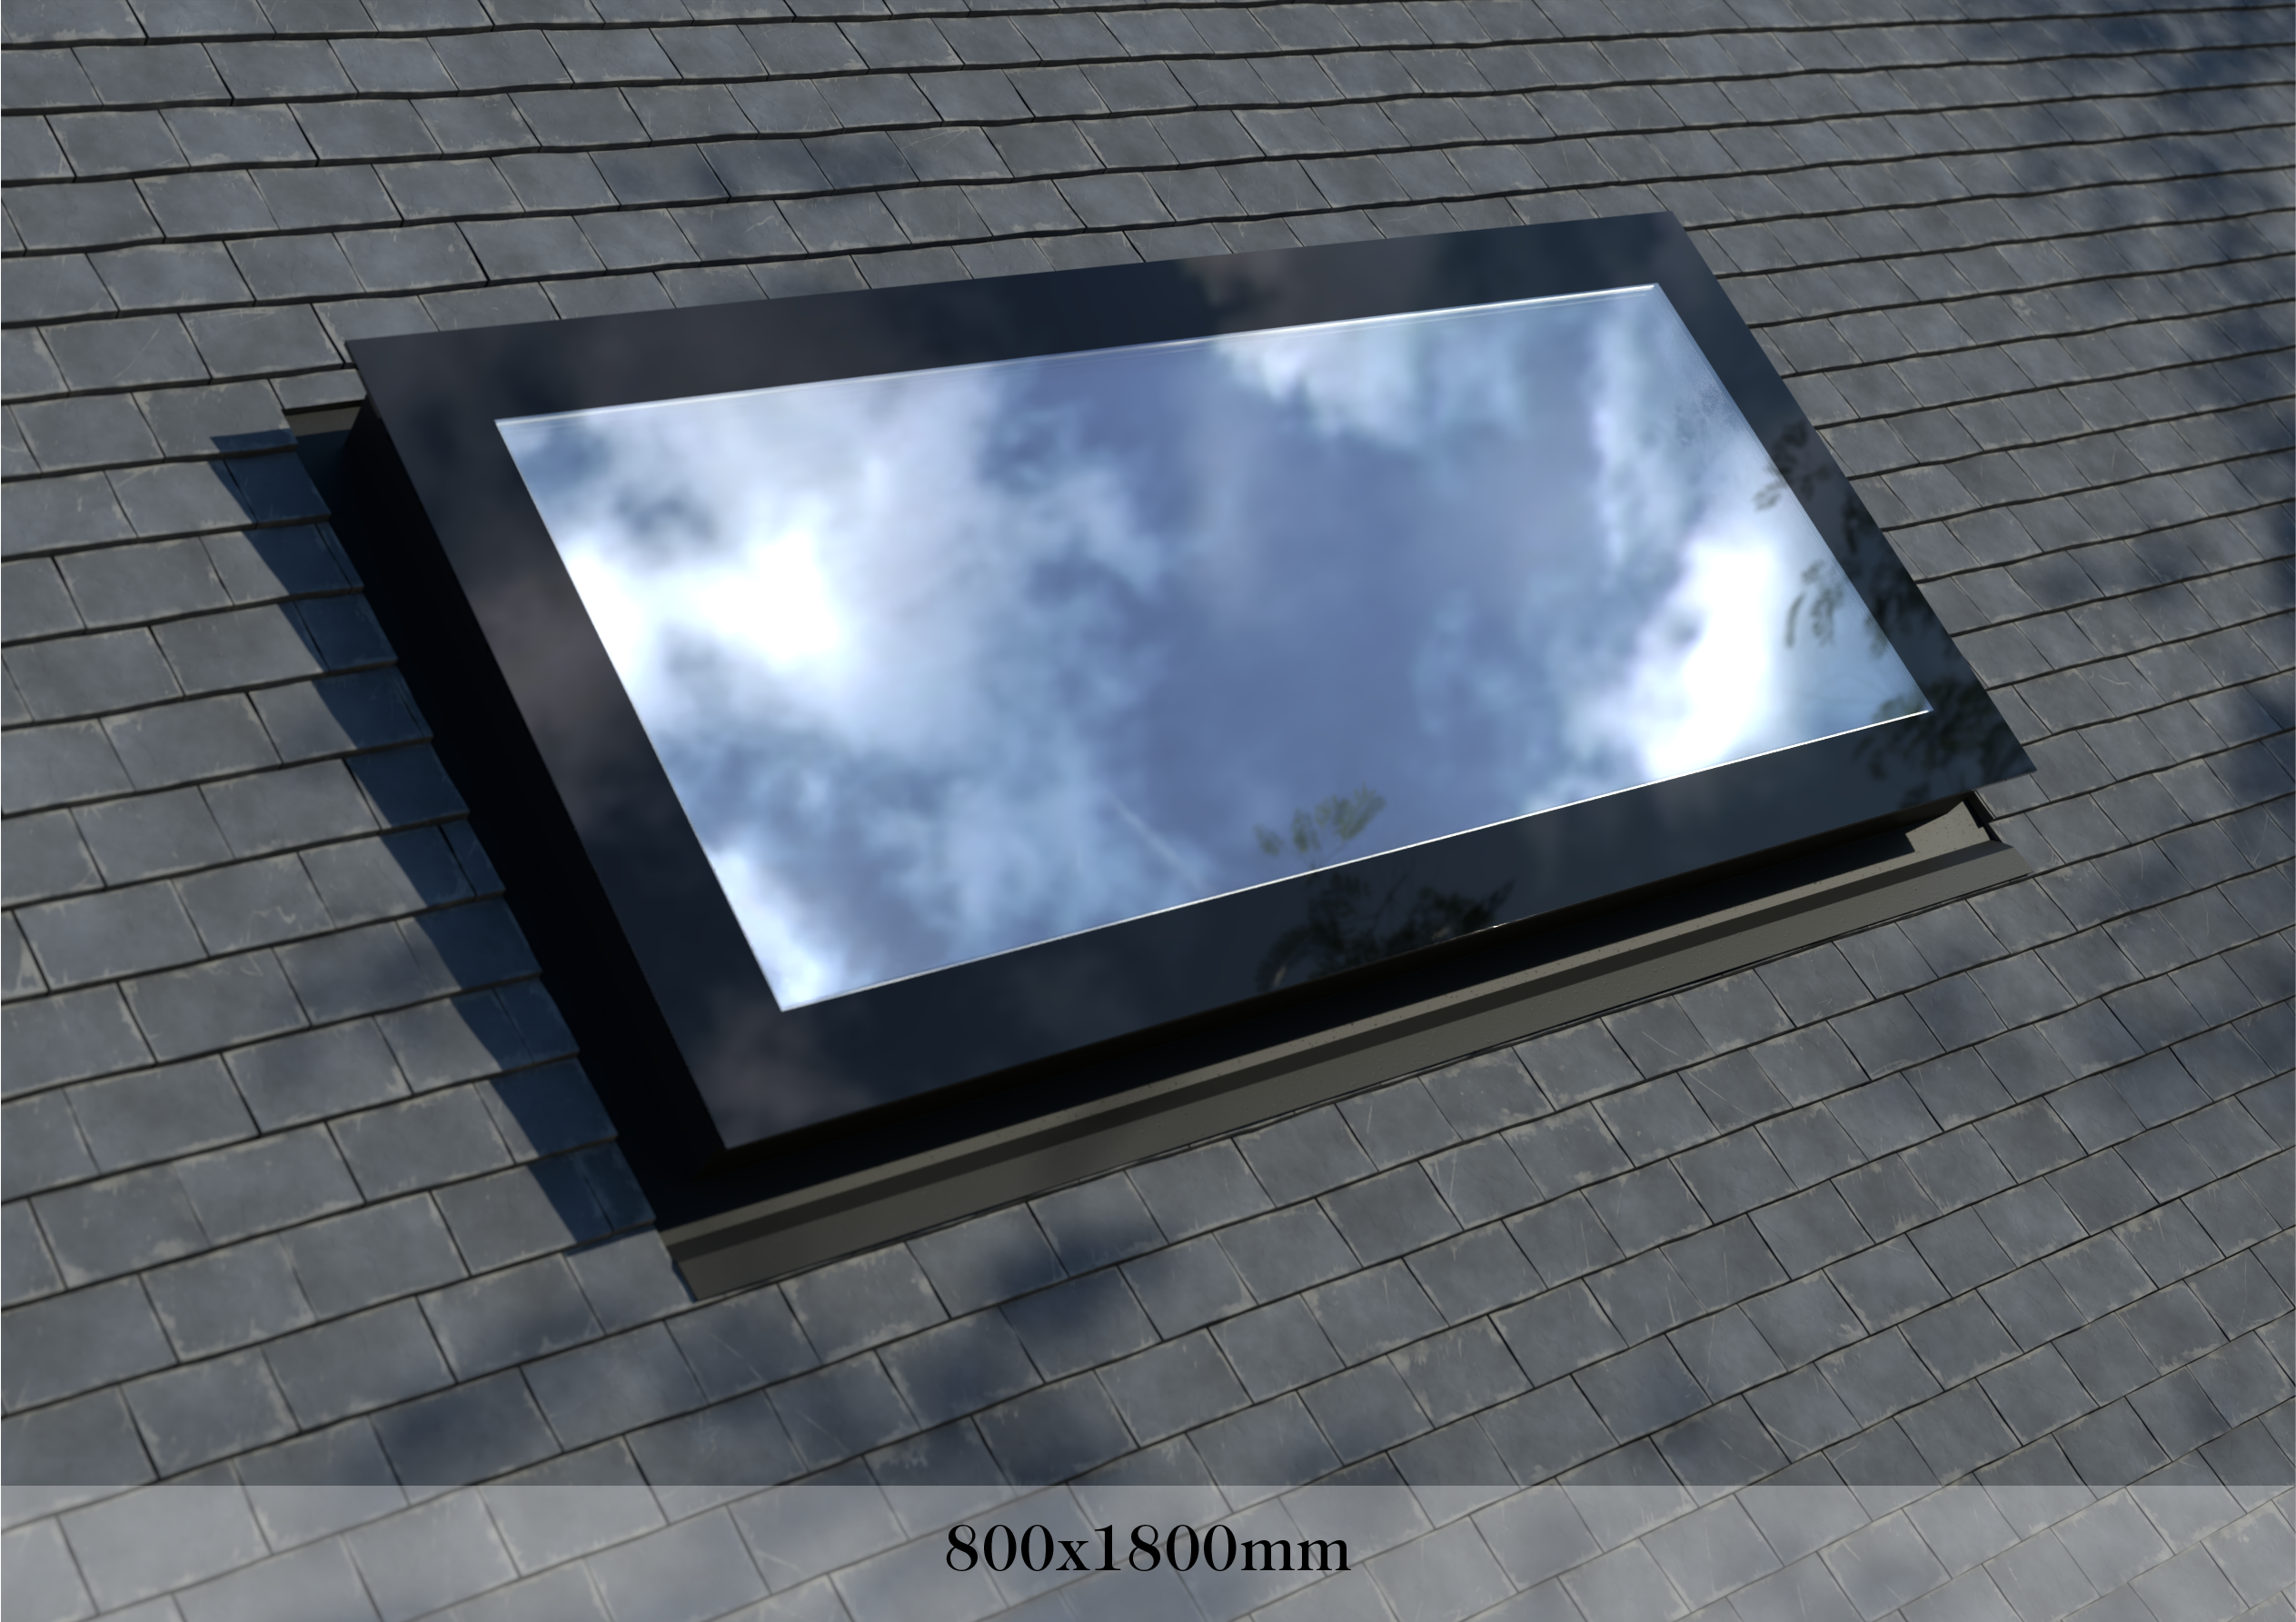 Pitched Roof Skylight 800 x 1800mm